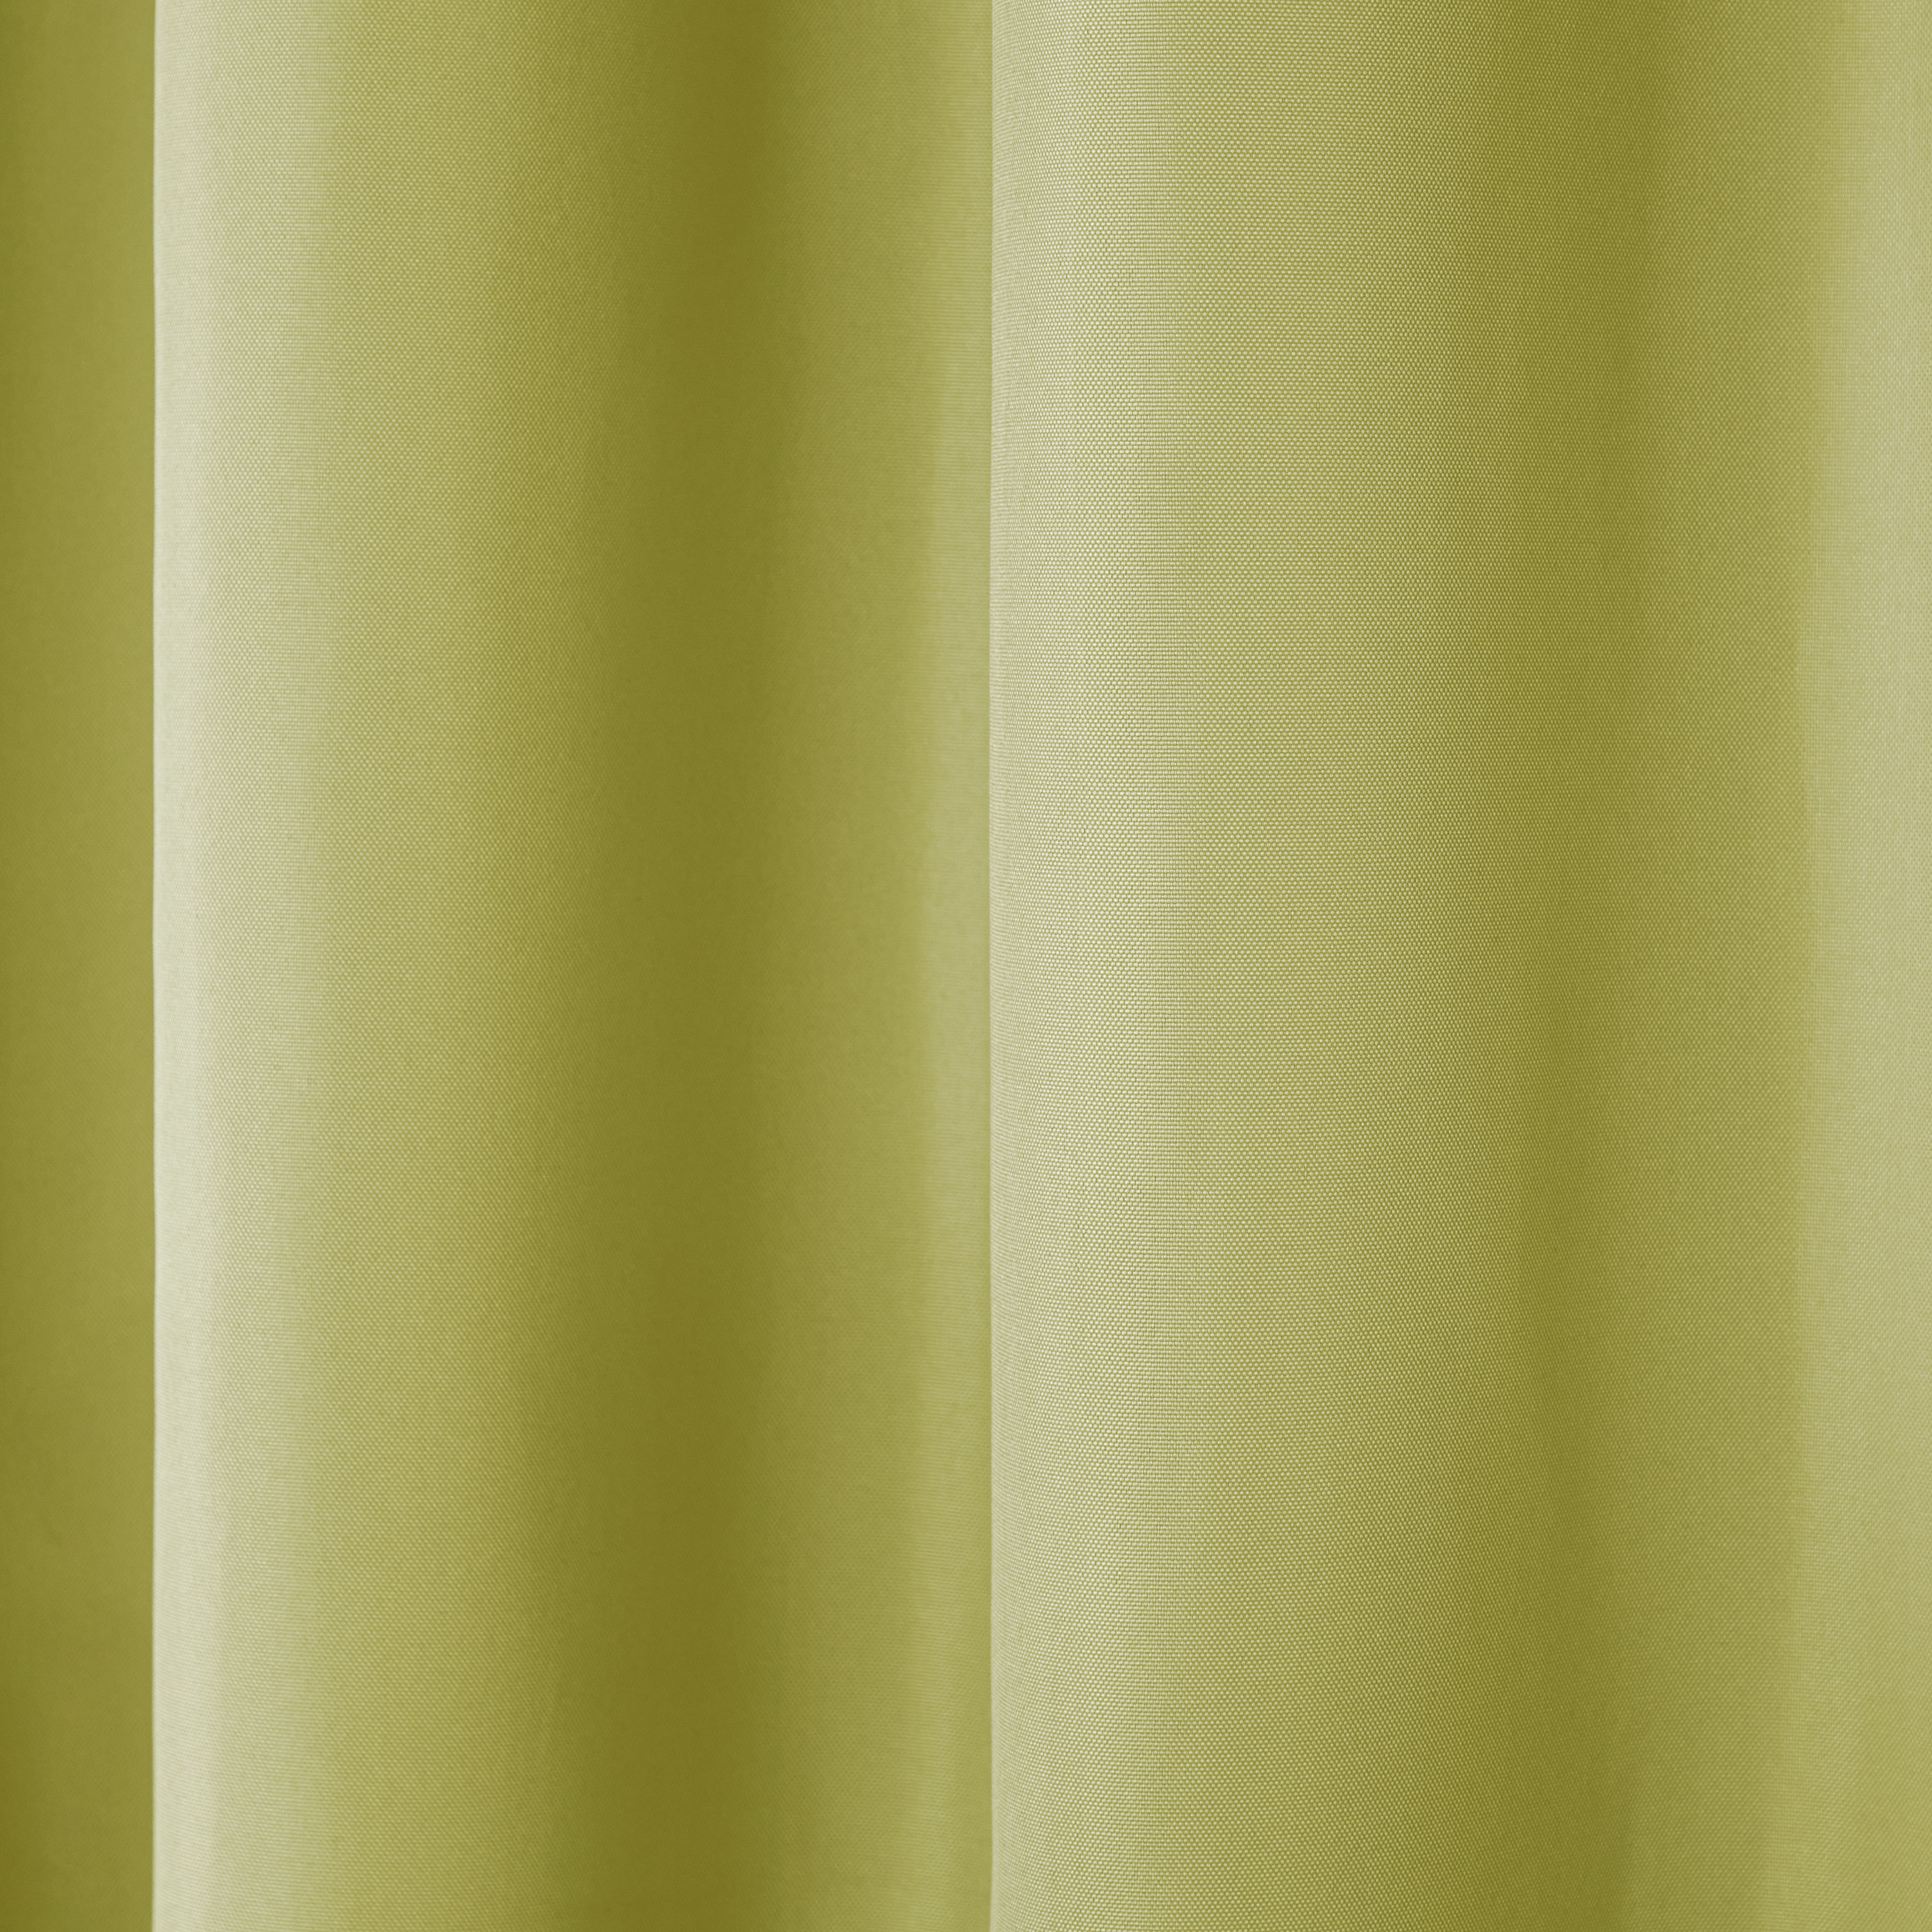 Exclusive Home Curtains Indoor/Outdoor Solid Cabana Grommet Top Curtain Panel Pair, 54x84, Kiwi Green - image 4 of 10